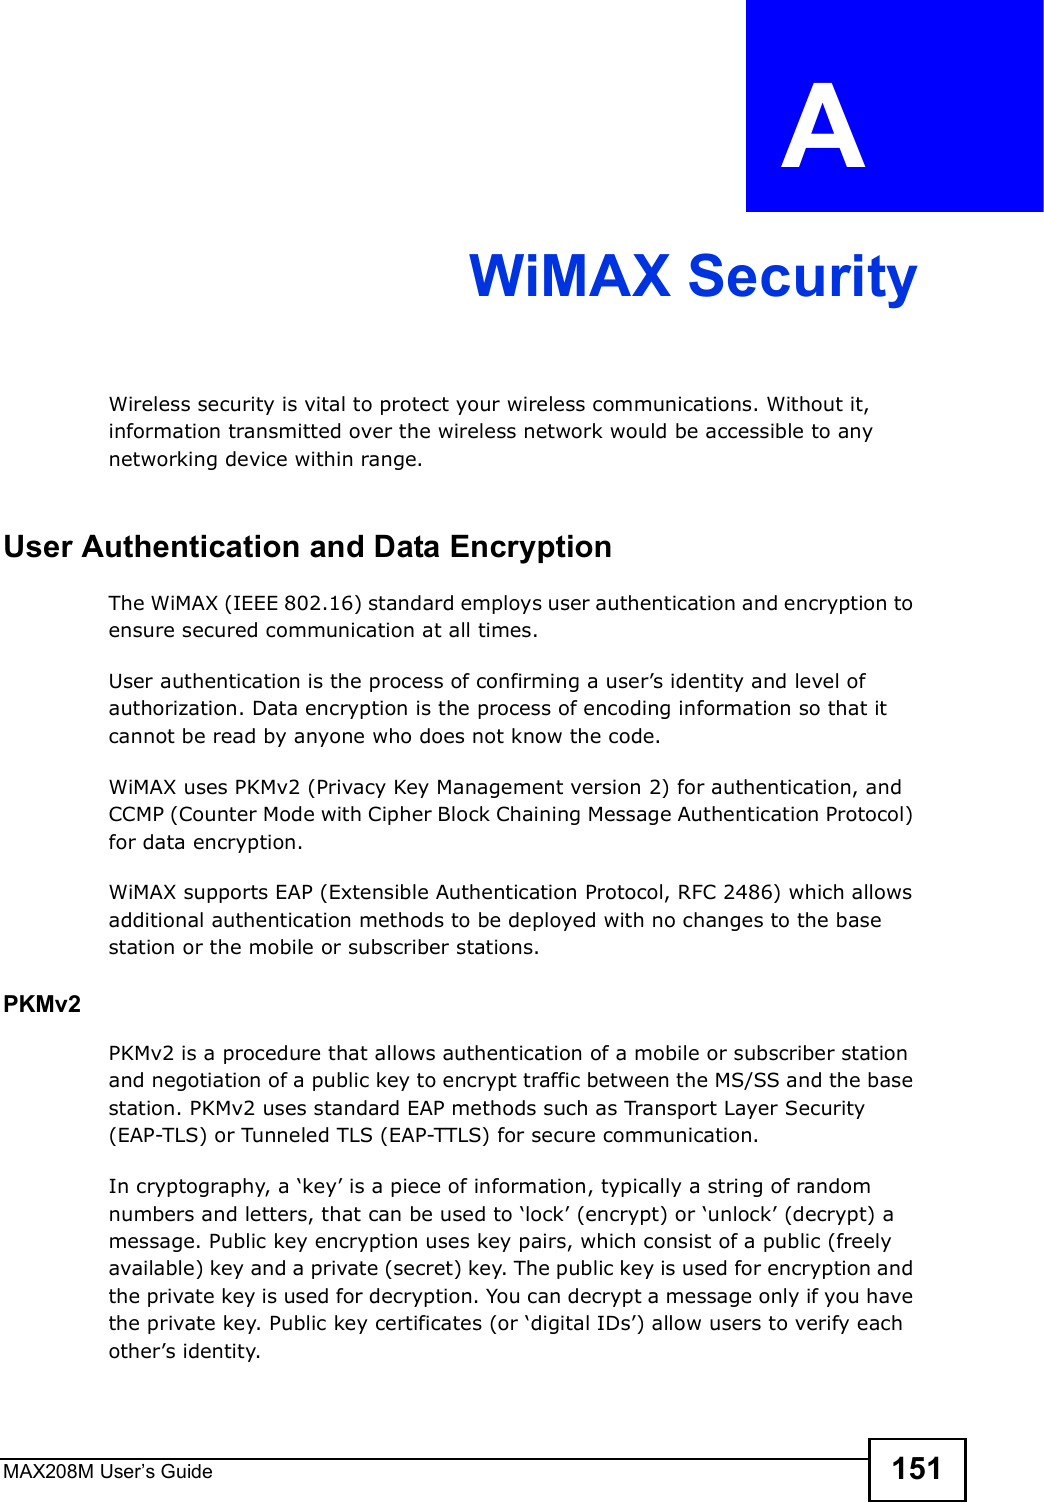 MAX208M User s Guide 151APPENDIX  A WiMAX SecurityWireless security is vital to protect your wireless communications. Without it, information transmitted over the wireless network would be accessible to any networking device within range.User Authentication and Data EncryptionThe WiMAX (IEEE 802.16) standard employs user authentication and encryption to ensure secured communication at all times.User authentication is the process of confirming a user s identity and level of authorization. Data encryption is the process of encoding information so that it cannot be read by anyone who does not know the code. WiMAX uses PKMv2 (Privacy Key Management version 2) for authentication, and CCMP (Counter Mode with Cipher Block Chaining Message Authentication Protocol) for data encryption. WiMAX supports EAP (Extensible Authentication Protocol, RFC 2486) which allows additional authentication methods to be deployed with no changes to the base station or the mobile or subscriber stations.PKMv2PKMv2 is a procedure that allows authentication of a mobile or subscriber station and negotiation of a public key to encrypt traffic between the MS/SS and the base station. PKMv2 uses standard EAP methods such as Transport Layer Security (EAP-TLS) or Tunneled TLS (EAP-TTLS) for secure communication. In cryptography, a %key  is a piece of information, typically a string of random numbers and letters, that can be used to %lock  (encrypt) or %unlock  (decrypt) a message. Public key encryption uses key pairs, which consist of a public (freely available) key and a private (secret) key. The public key is used for encryption and the private key is used for decryption. You can decrypt a message only if you have the private key. Public key certificates (or %digital IDs ) allow users to verify each other s identity. 